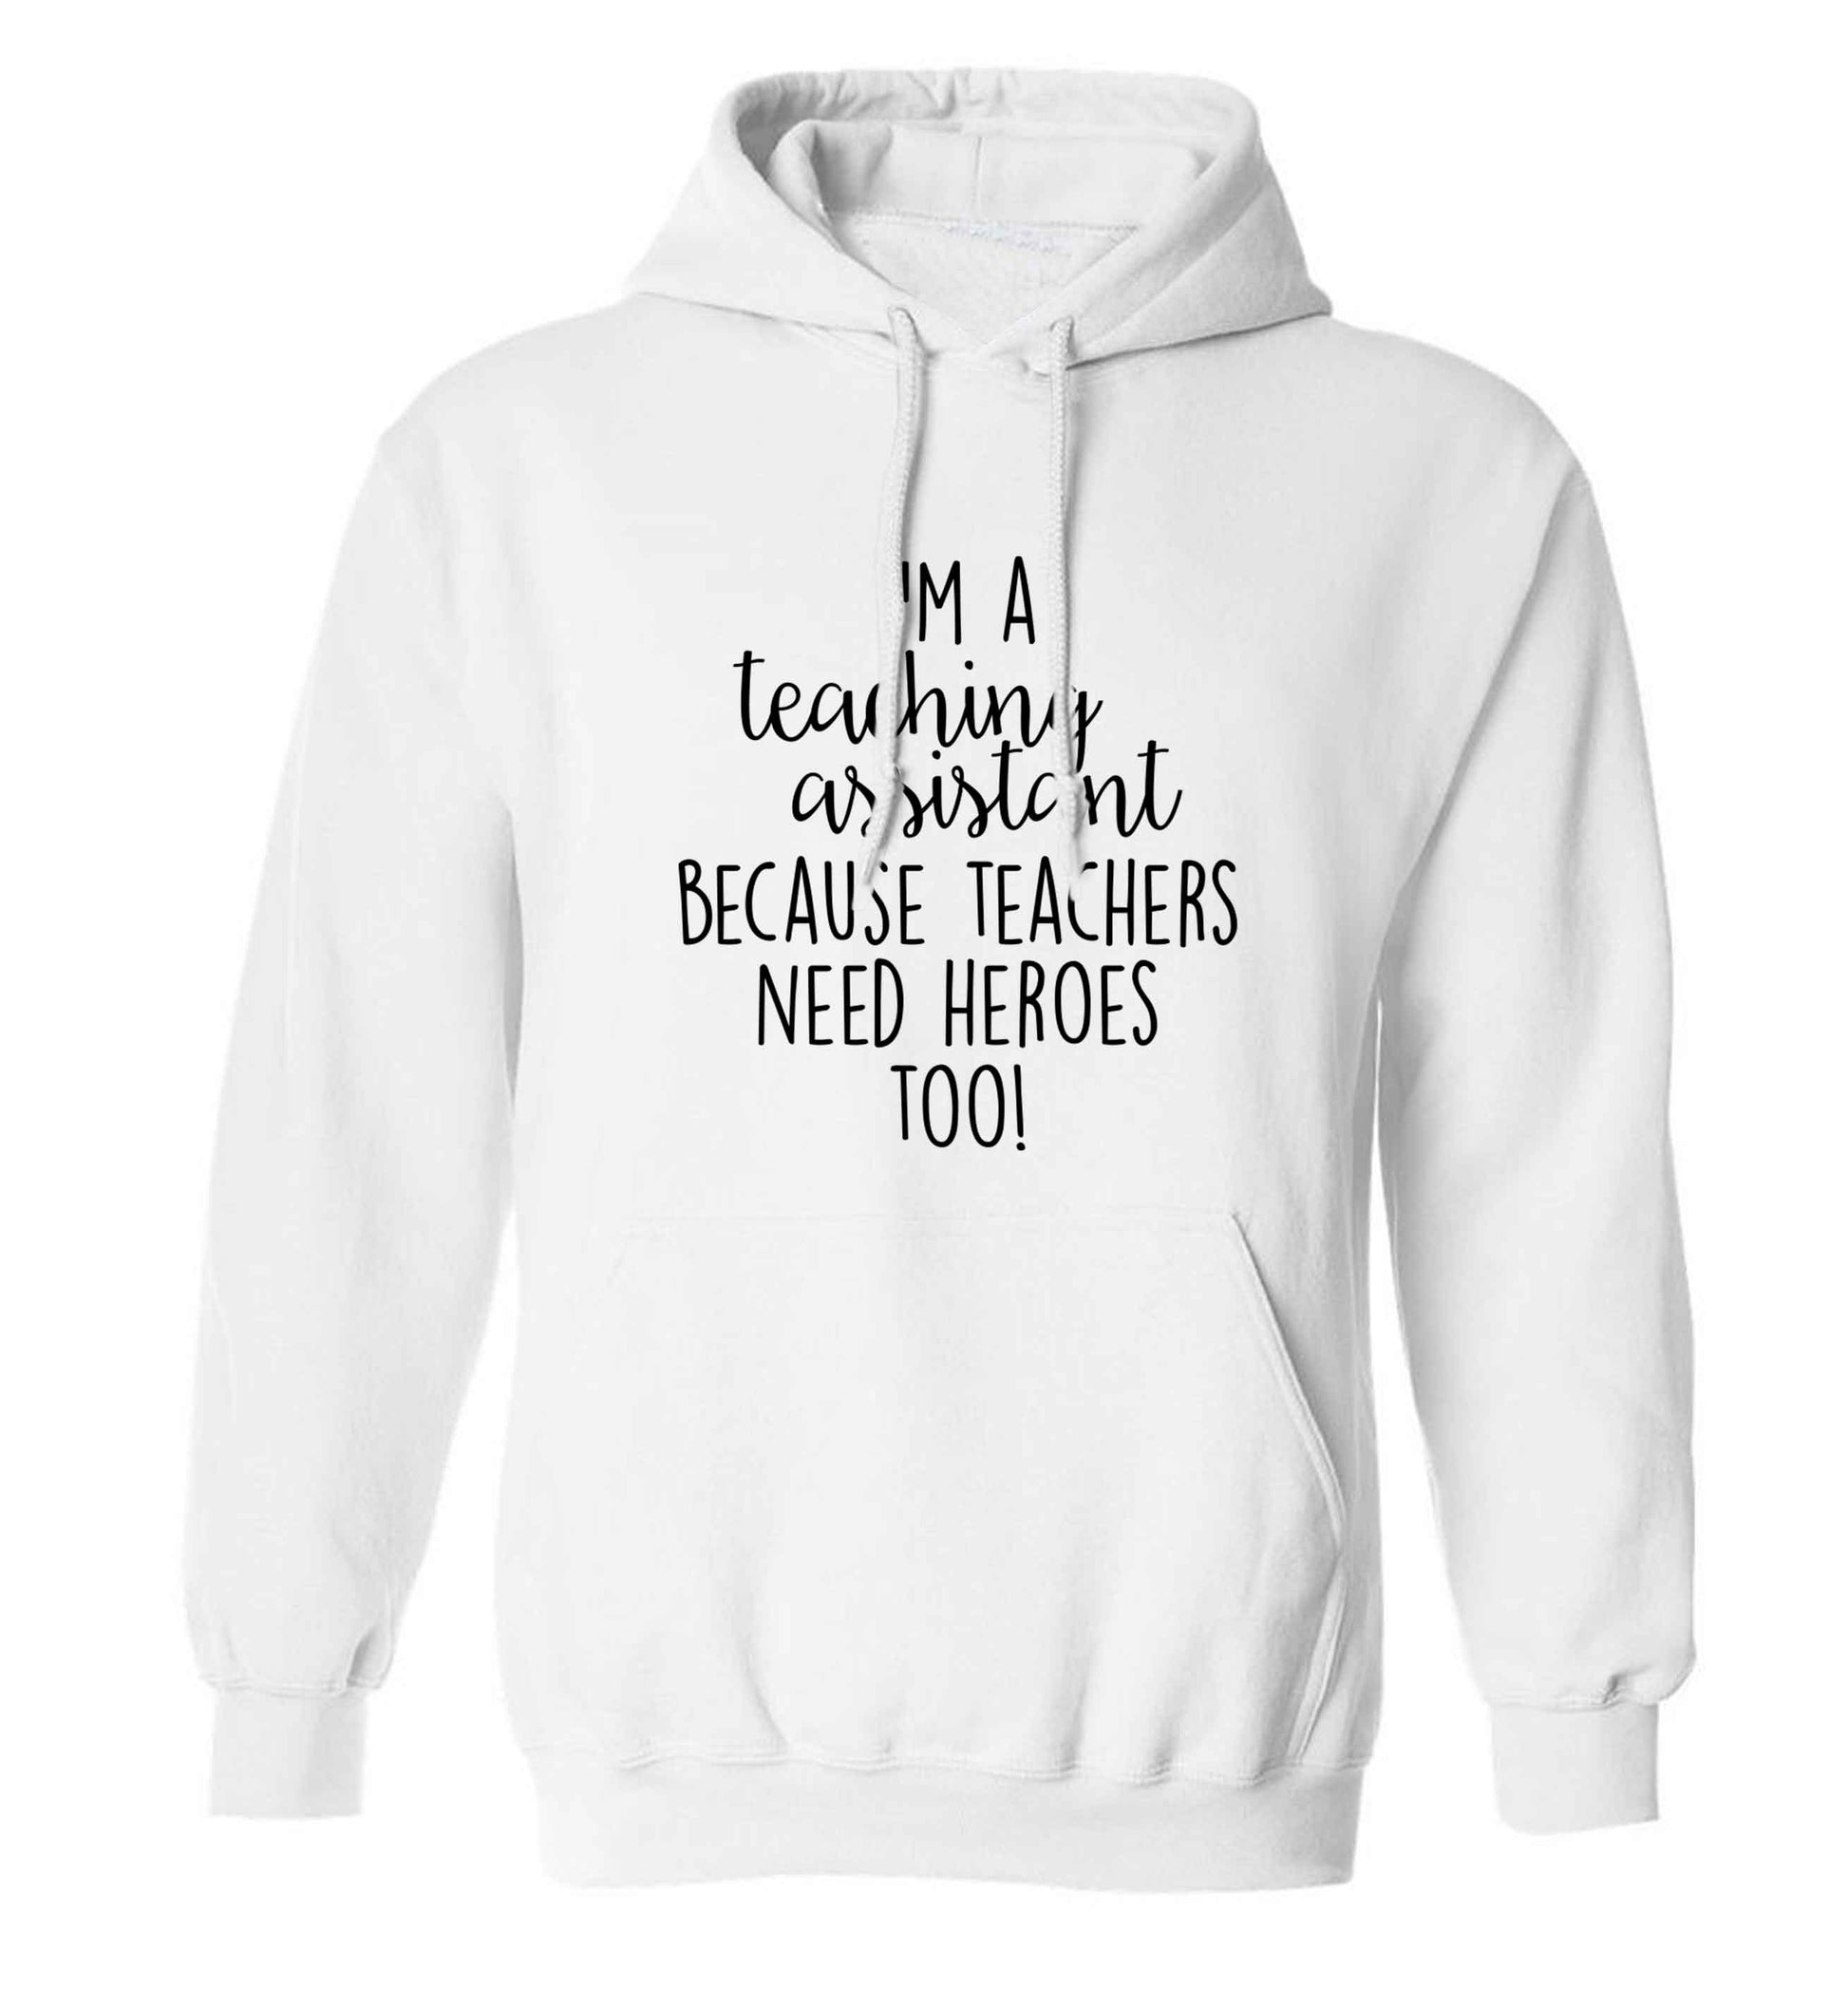 I'm a teaching assistant because teachers need heroes too! adults unisex white hoodie 2XL